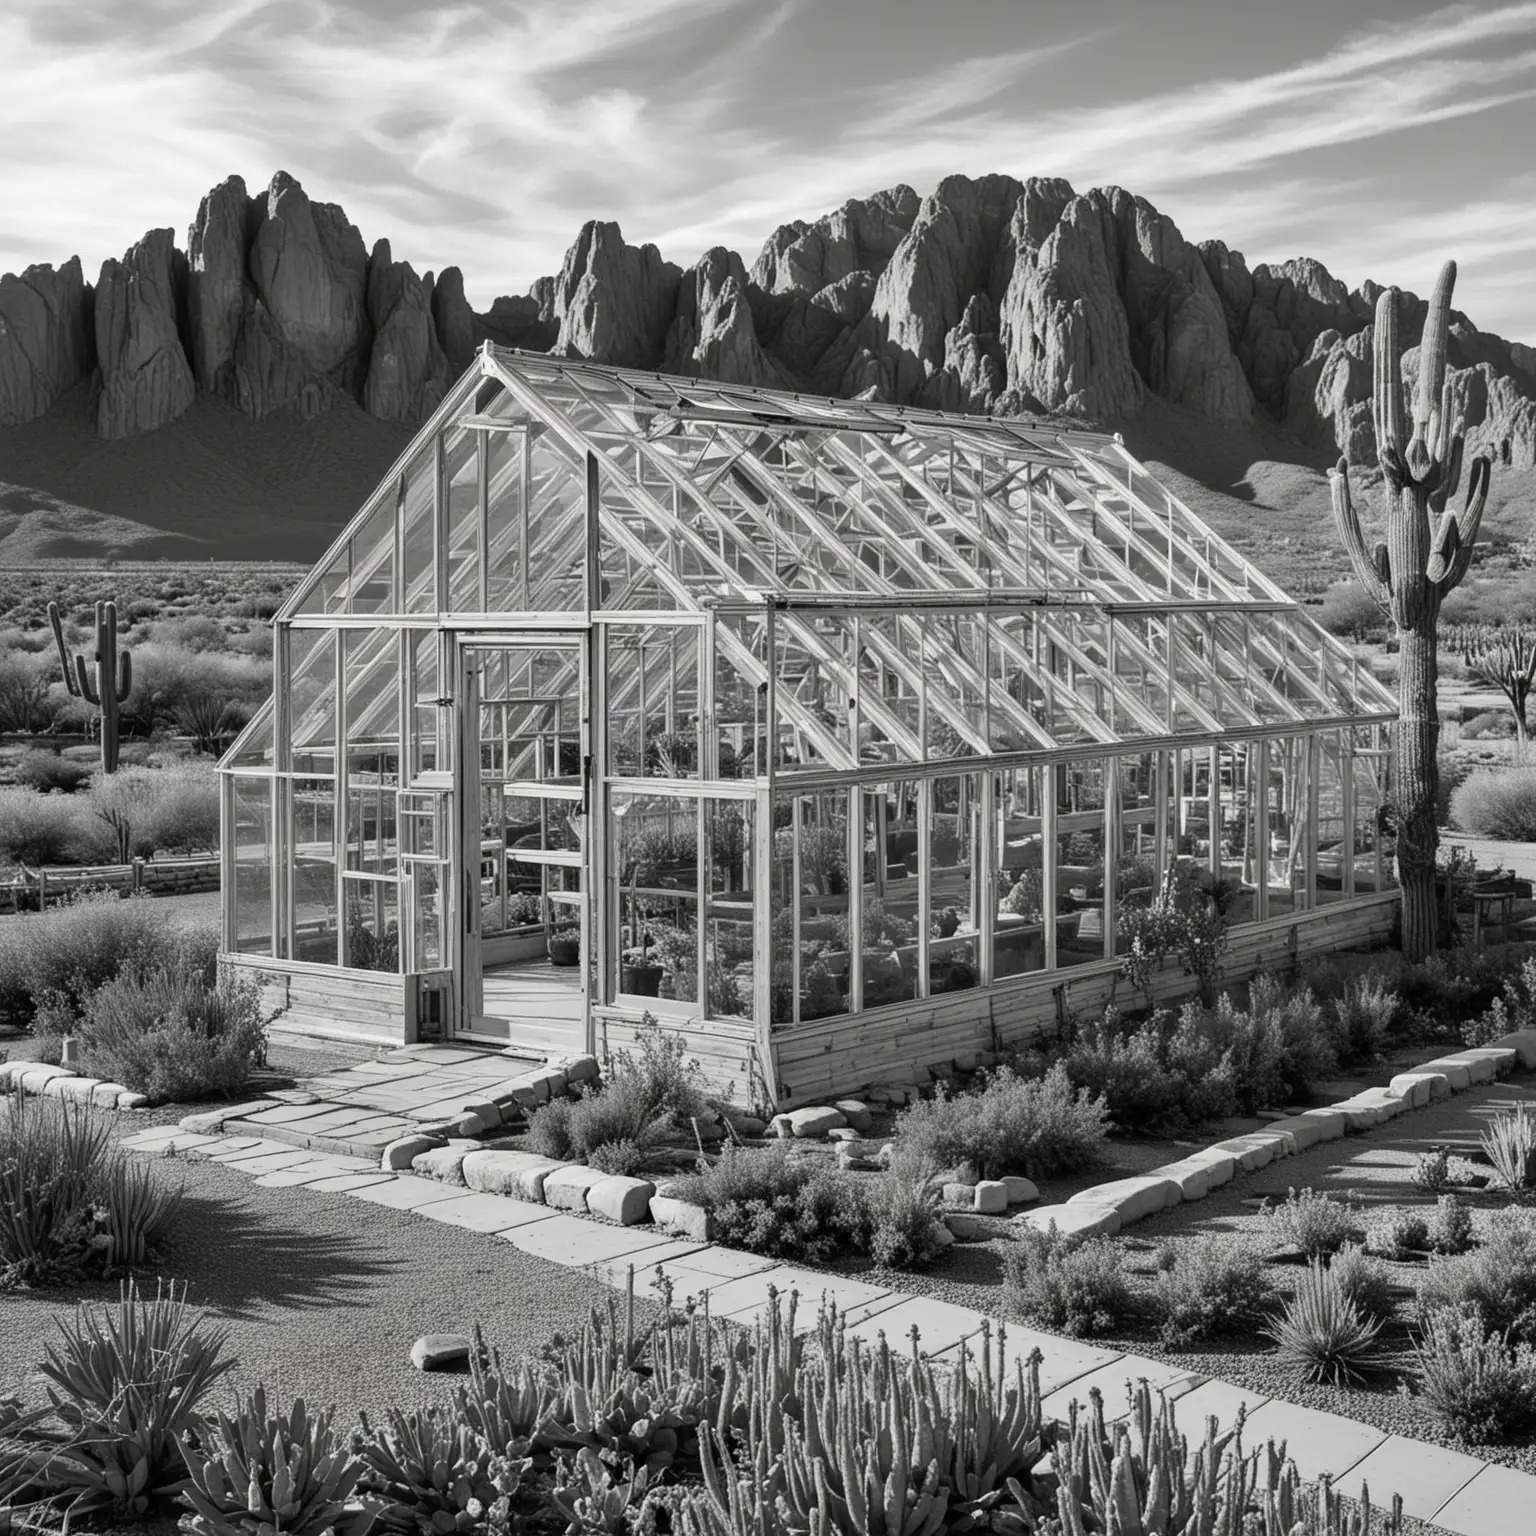 Rustic Wooden Greenhouse Exterior at Superstition Mountain Apache Junction AZ